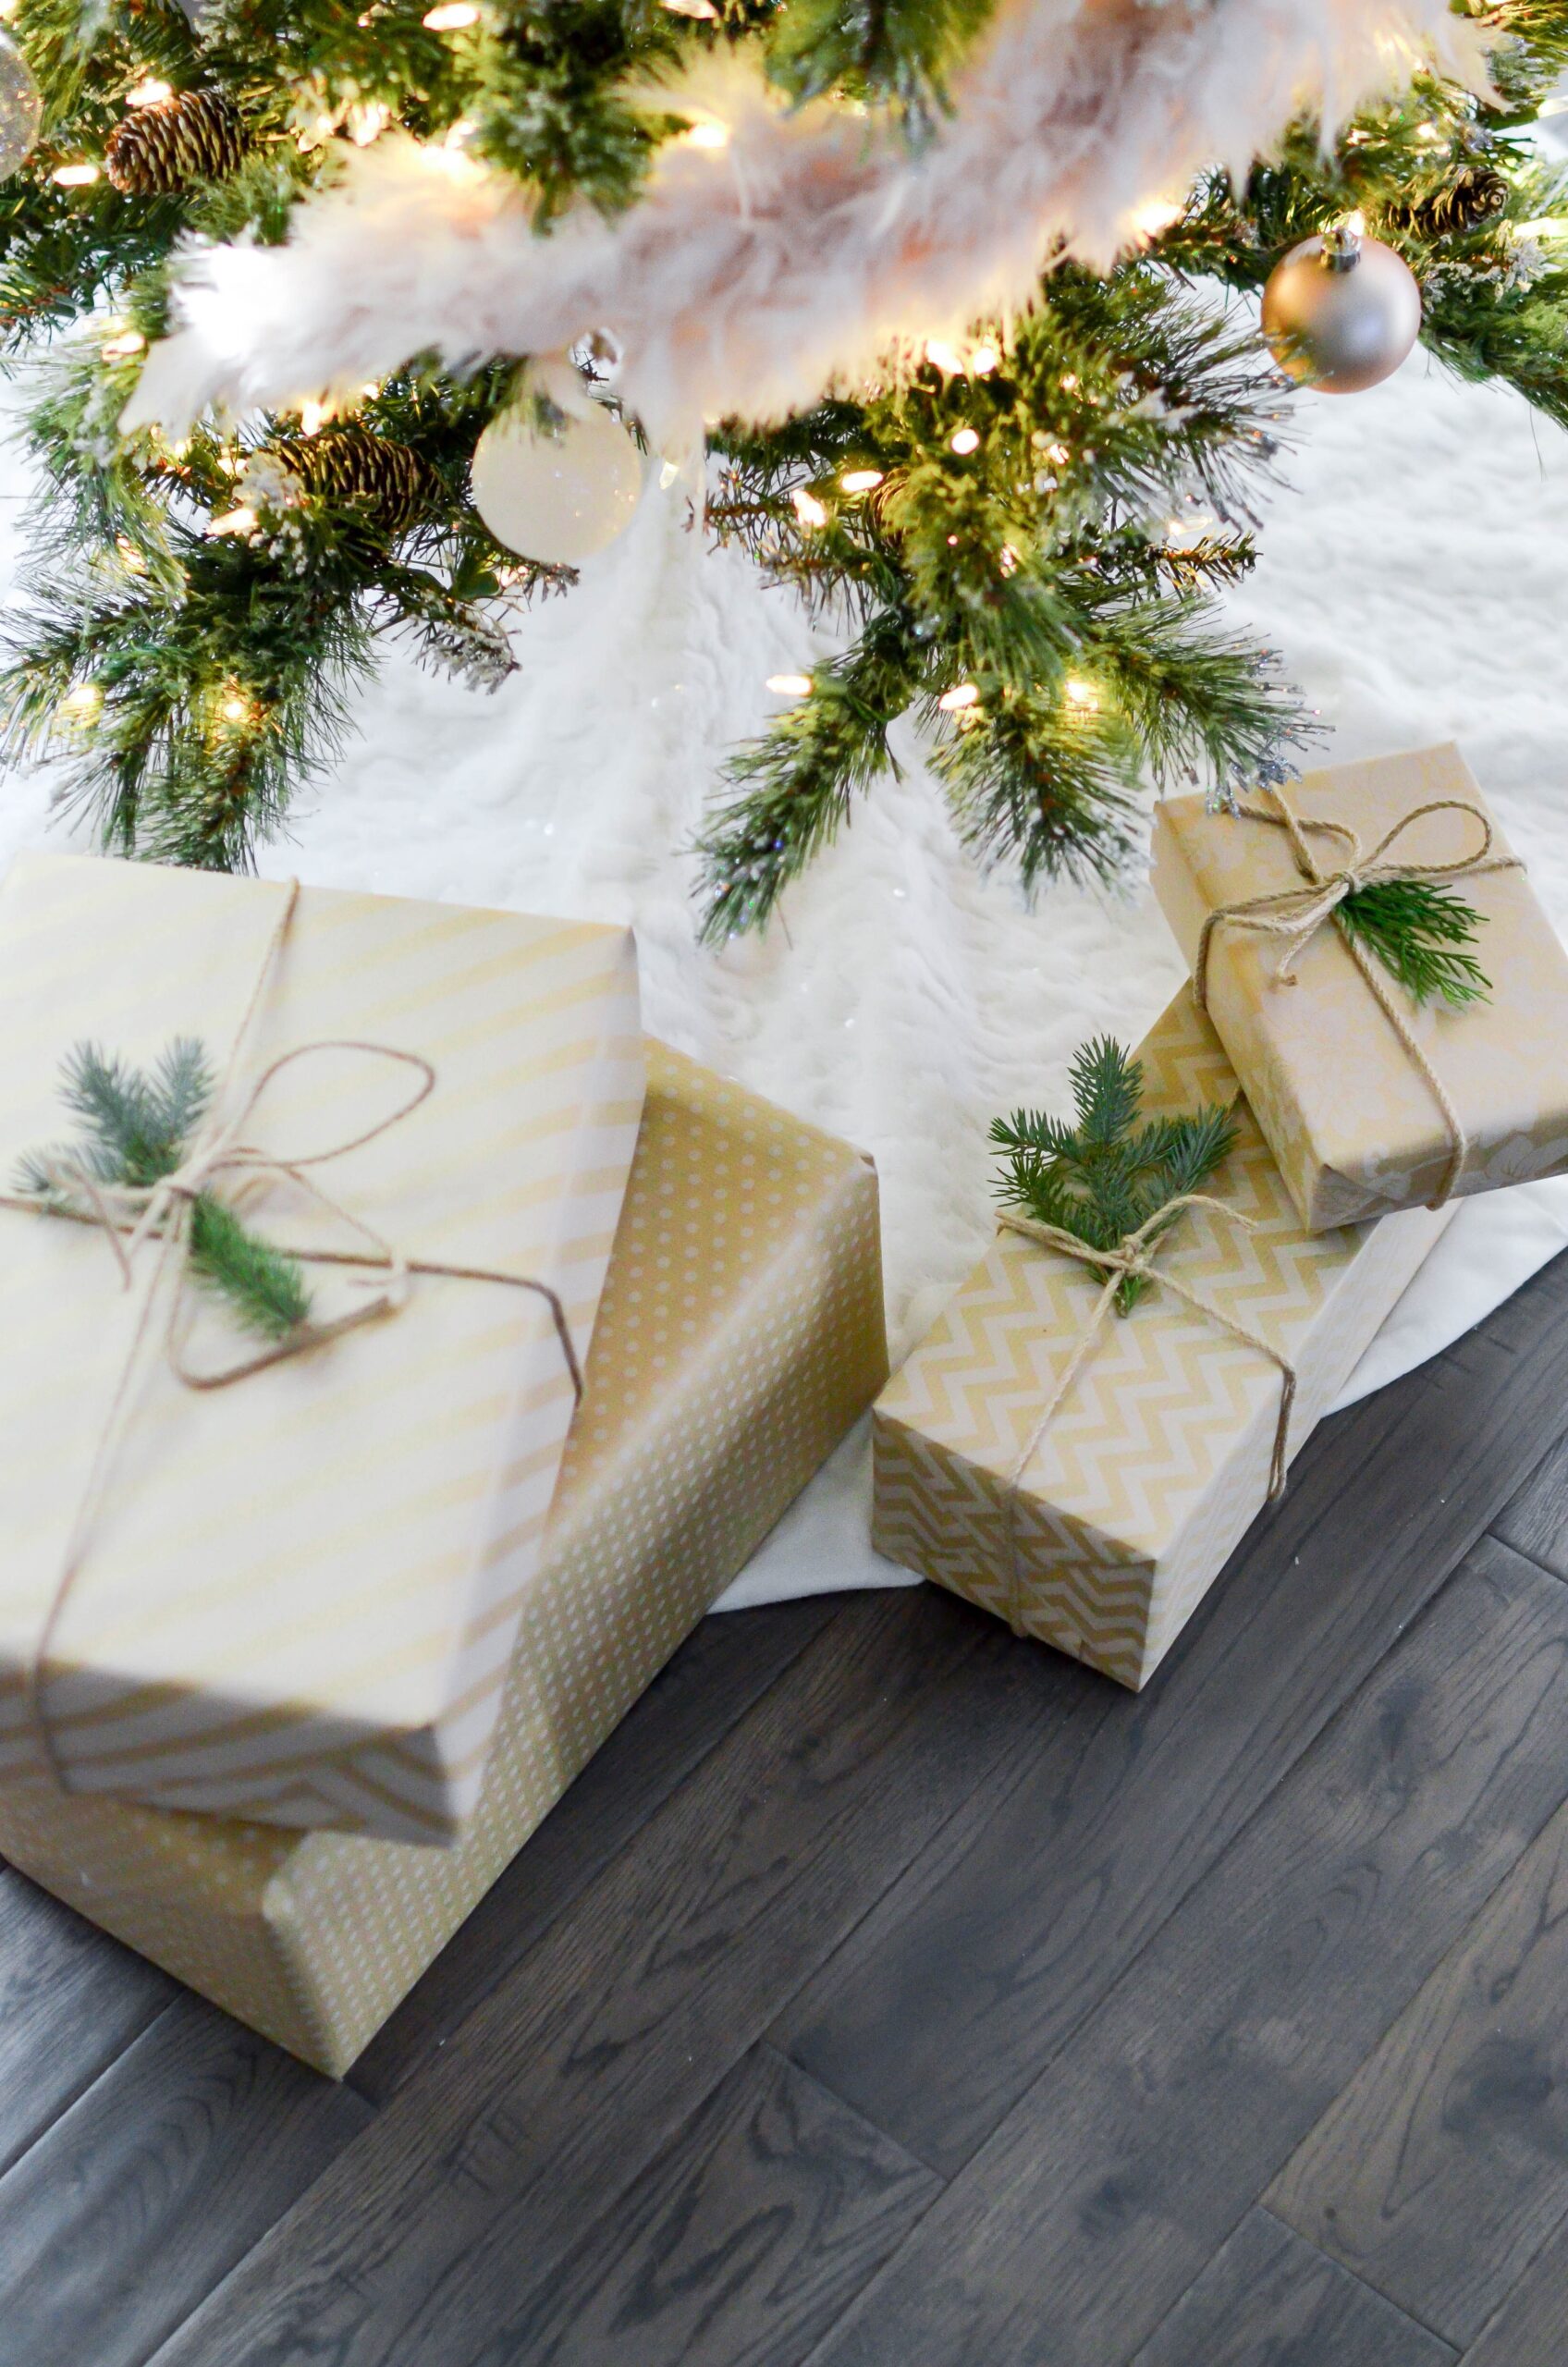 brown wrapped gifts under a holday tree with white lights